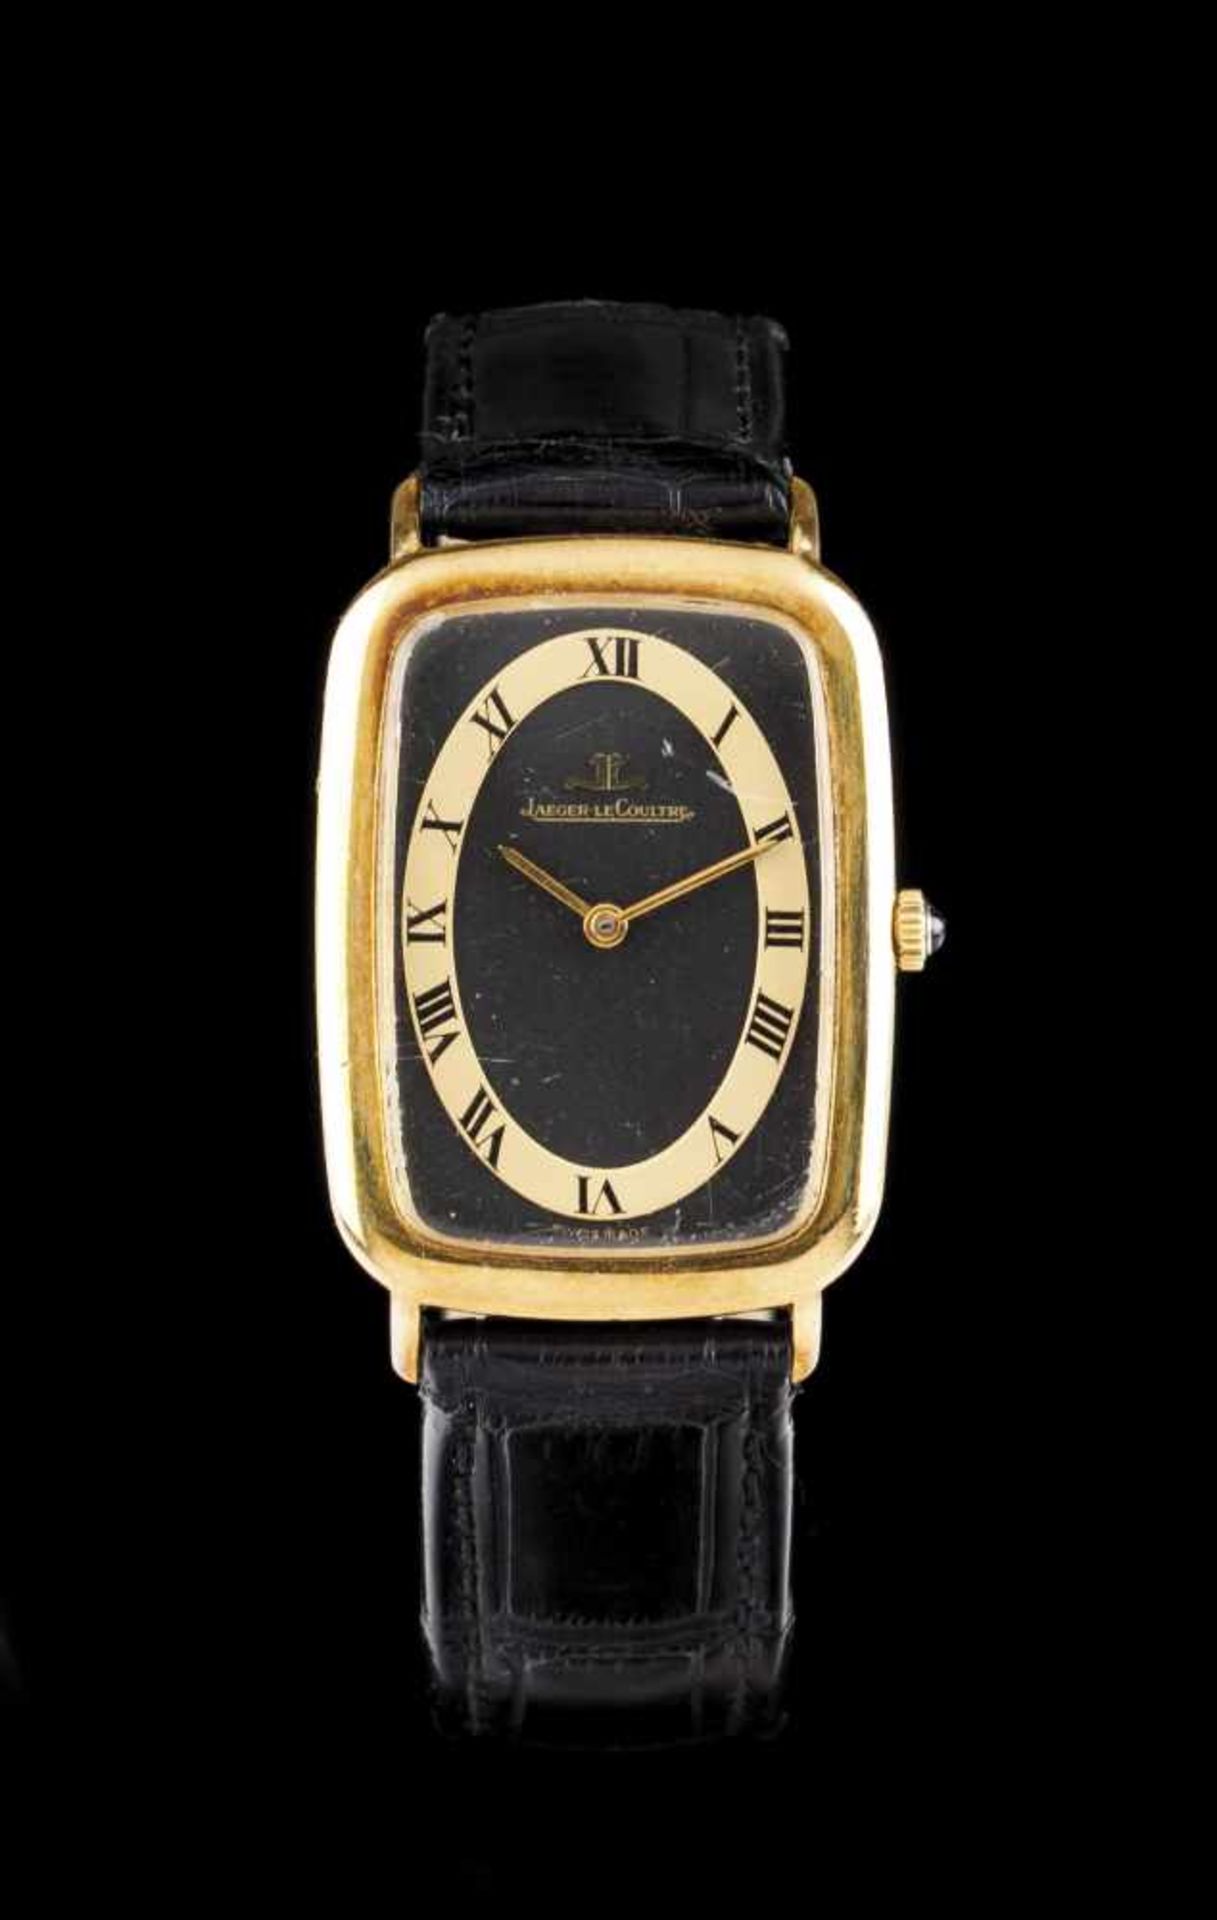 Jaeger Le CoultreJaeger Le Coultre watch, winding mechanic mechanism cal.818/2, with gold (750/